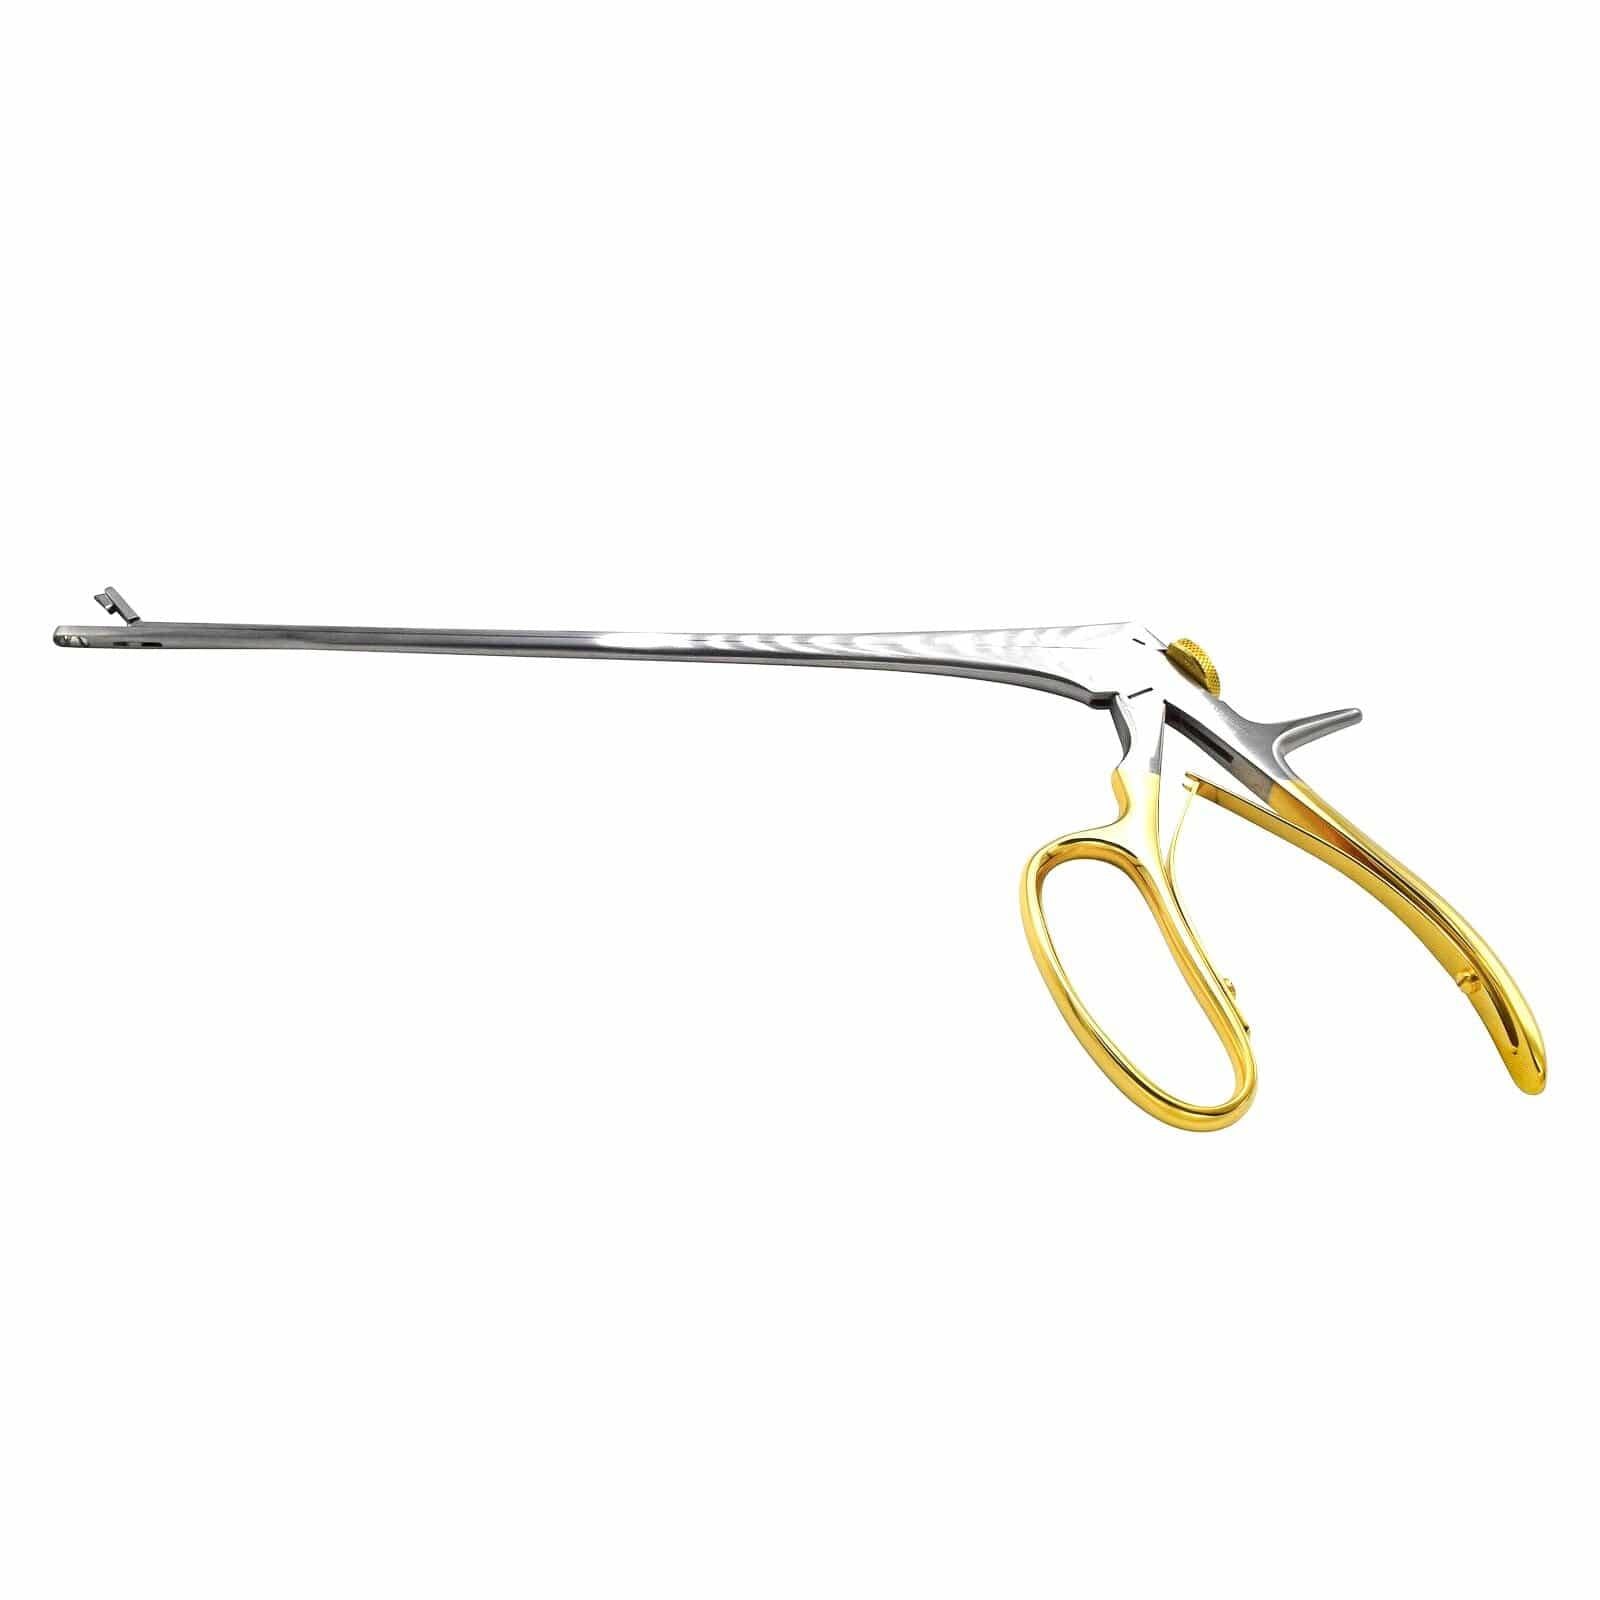 Armo Surgical Instruments 3x7mm Armo Tischler Biopsy Forceps